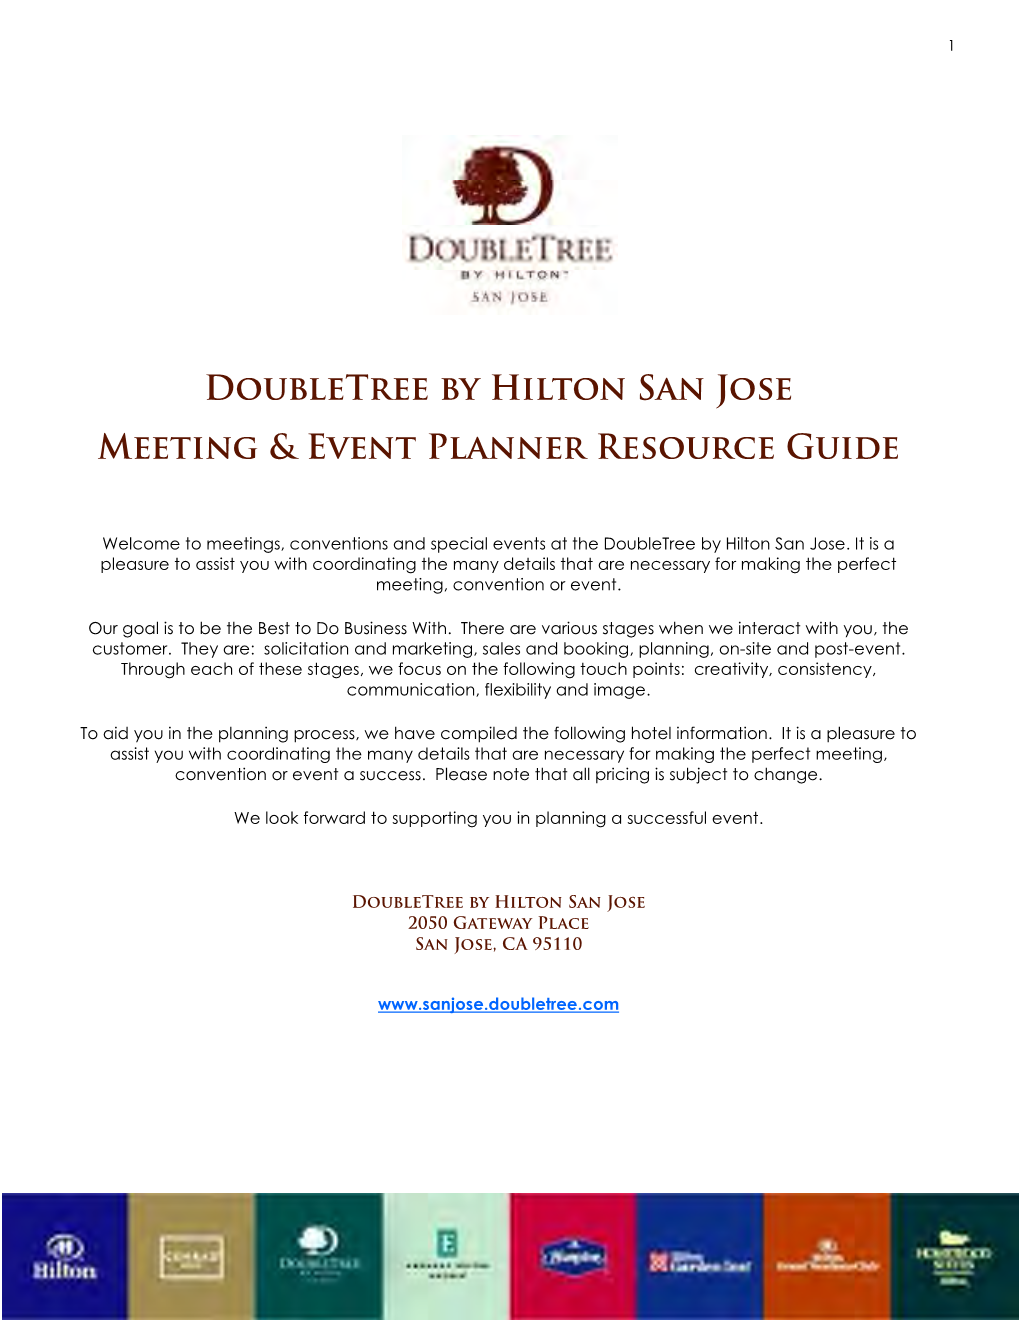 Meeting and Event Planning Resource Guide 2011